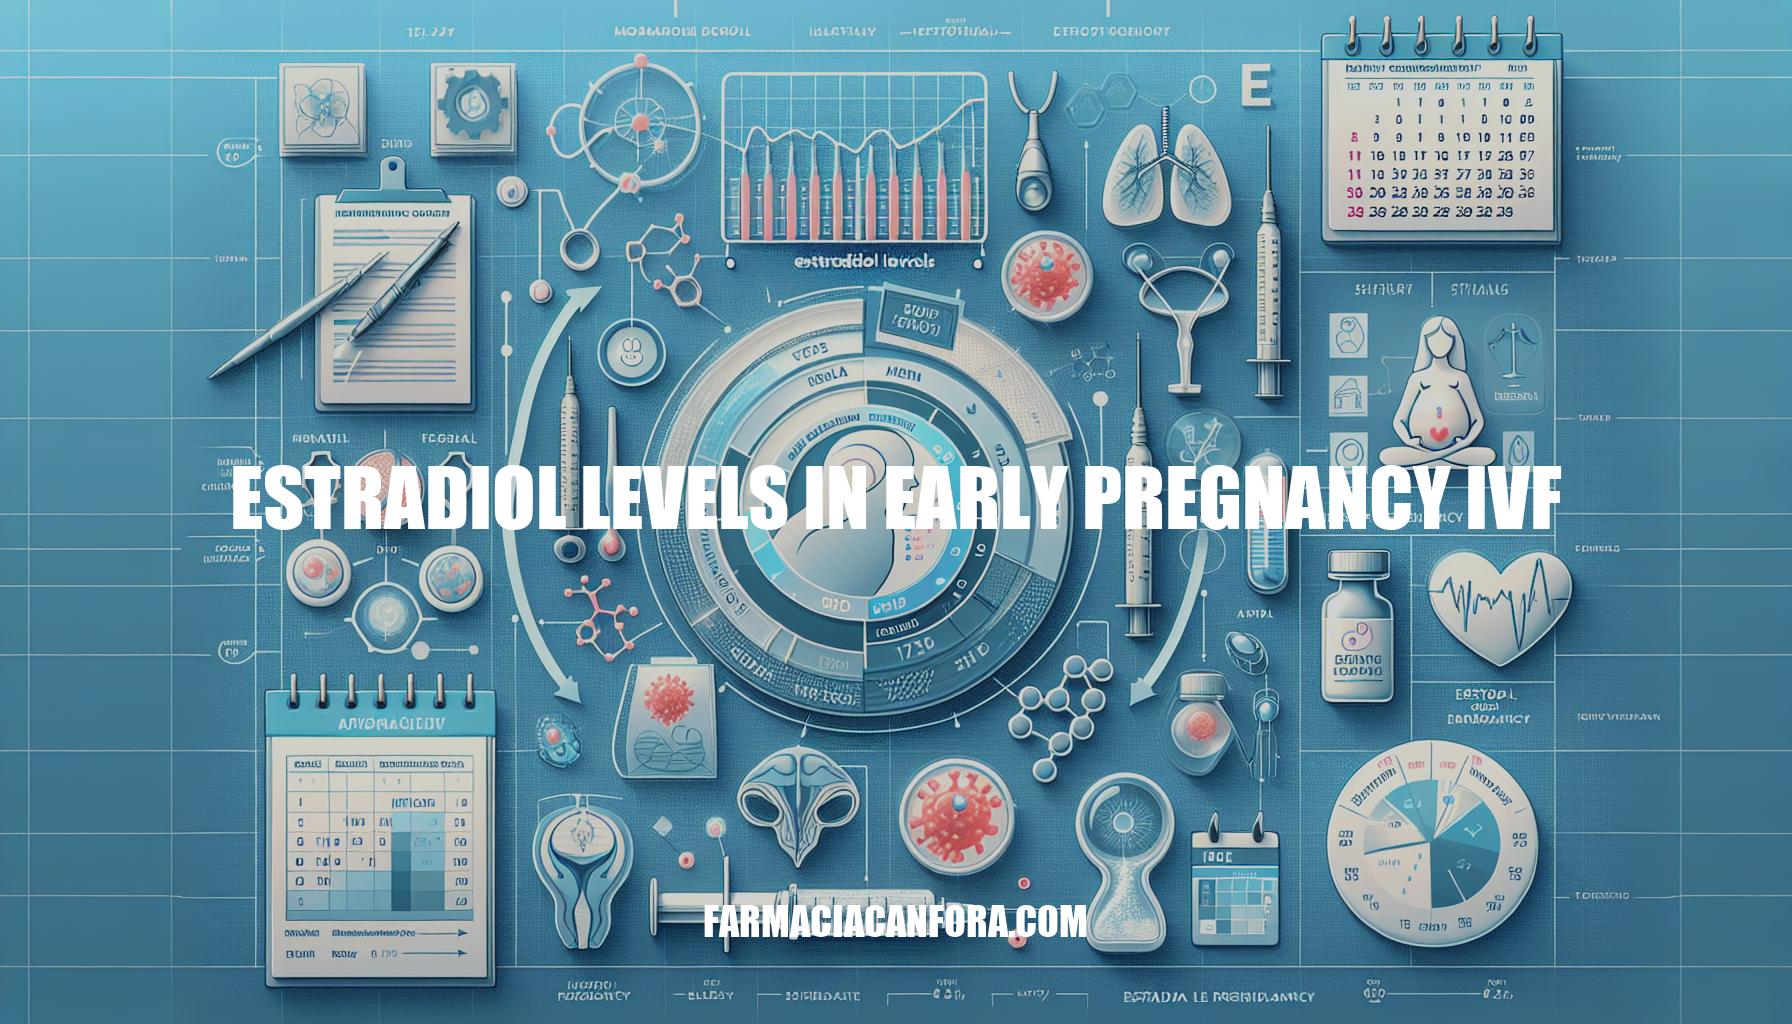 Estradiol Levels in Early Pregnancy IVF: Monitoring and Management Guide